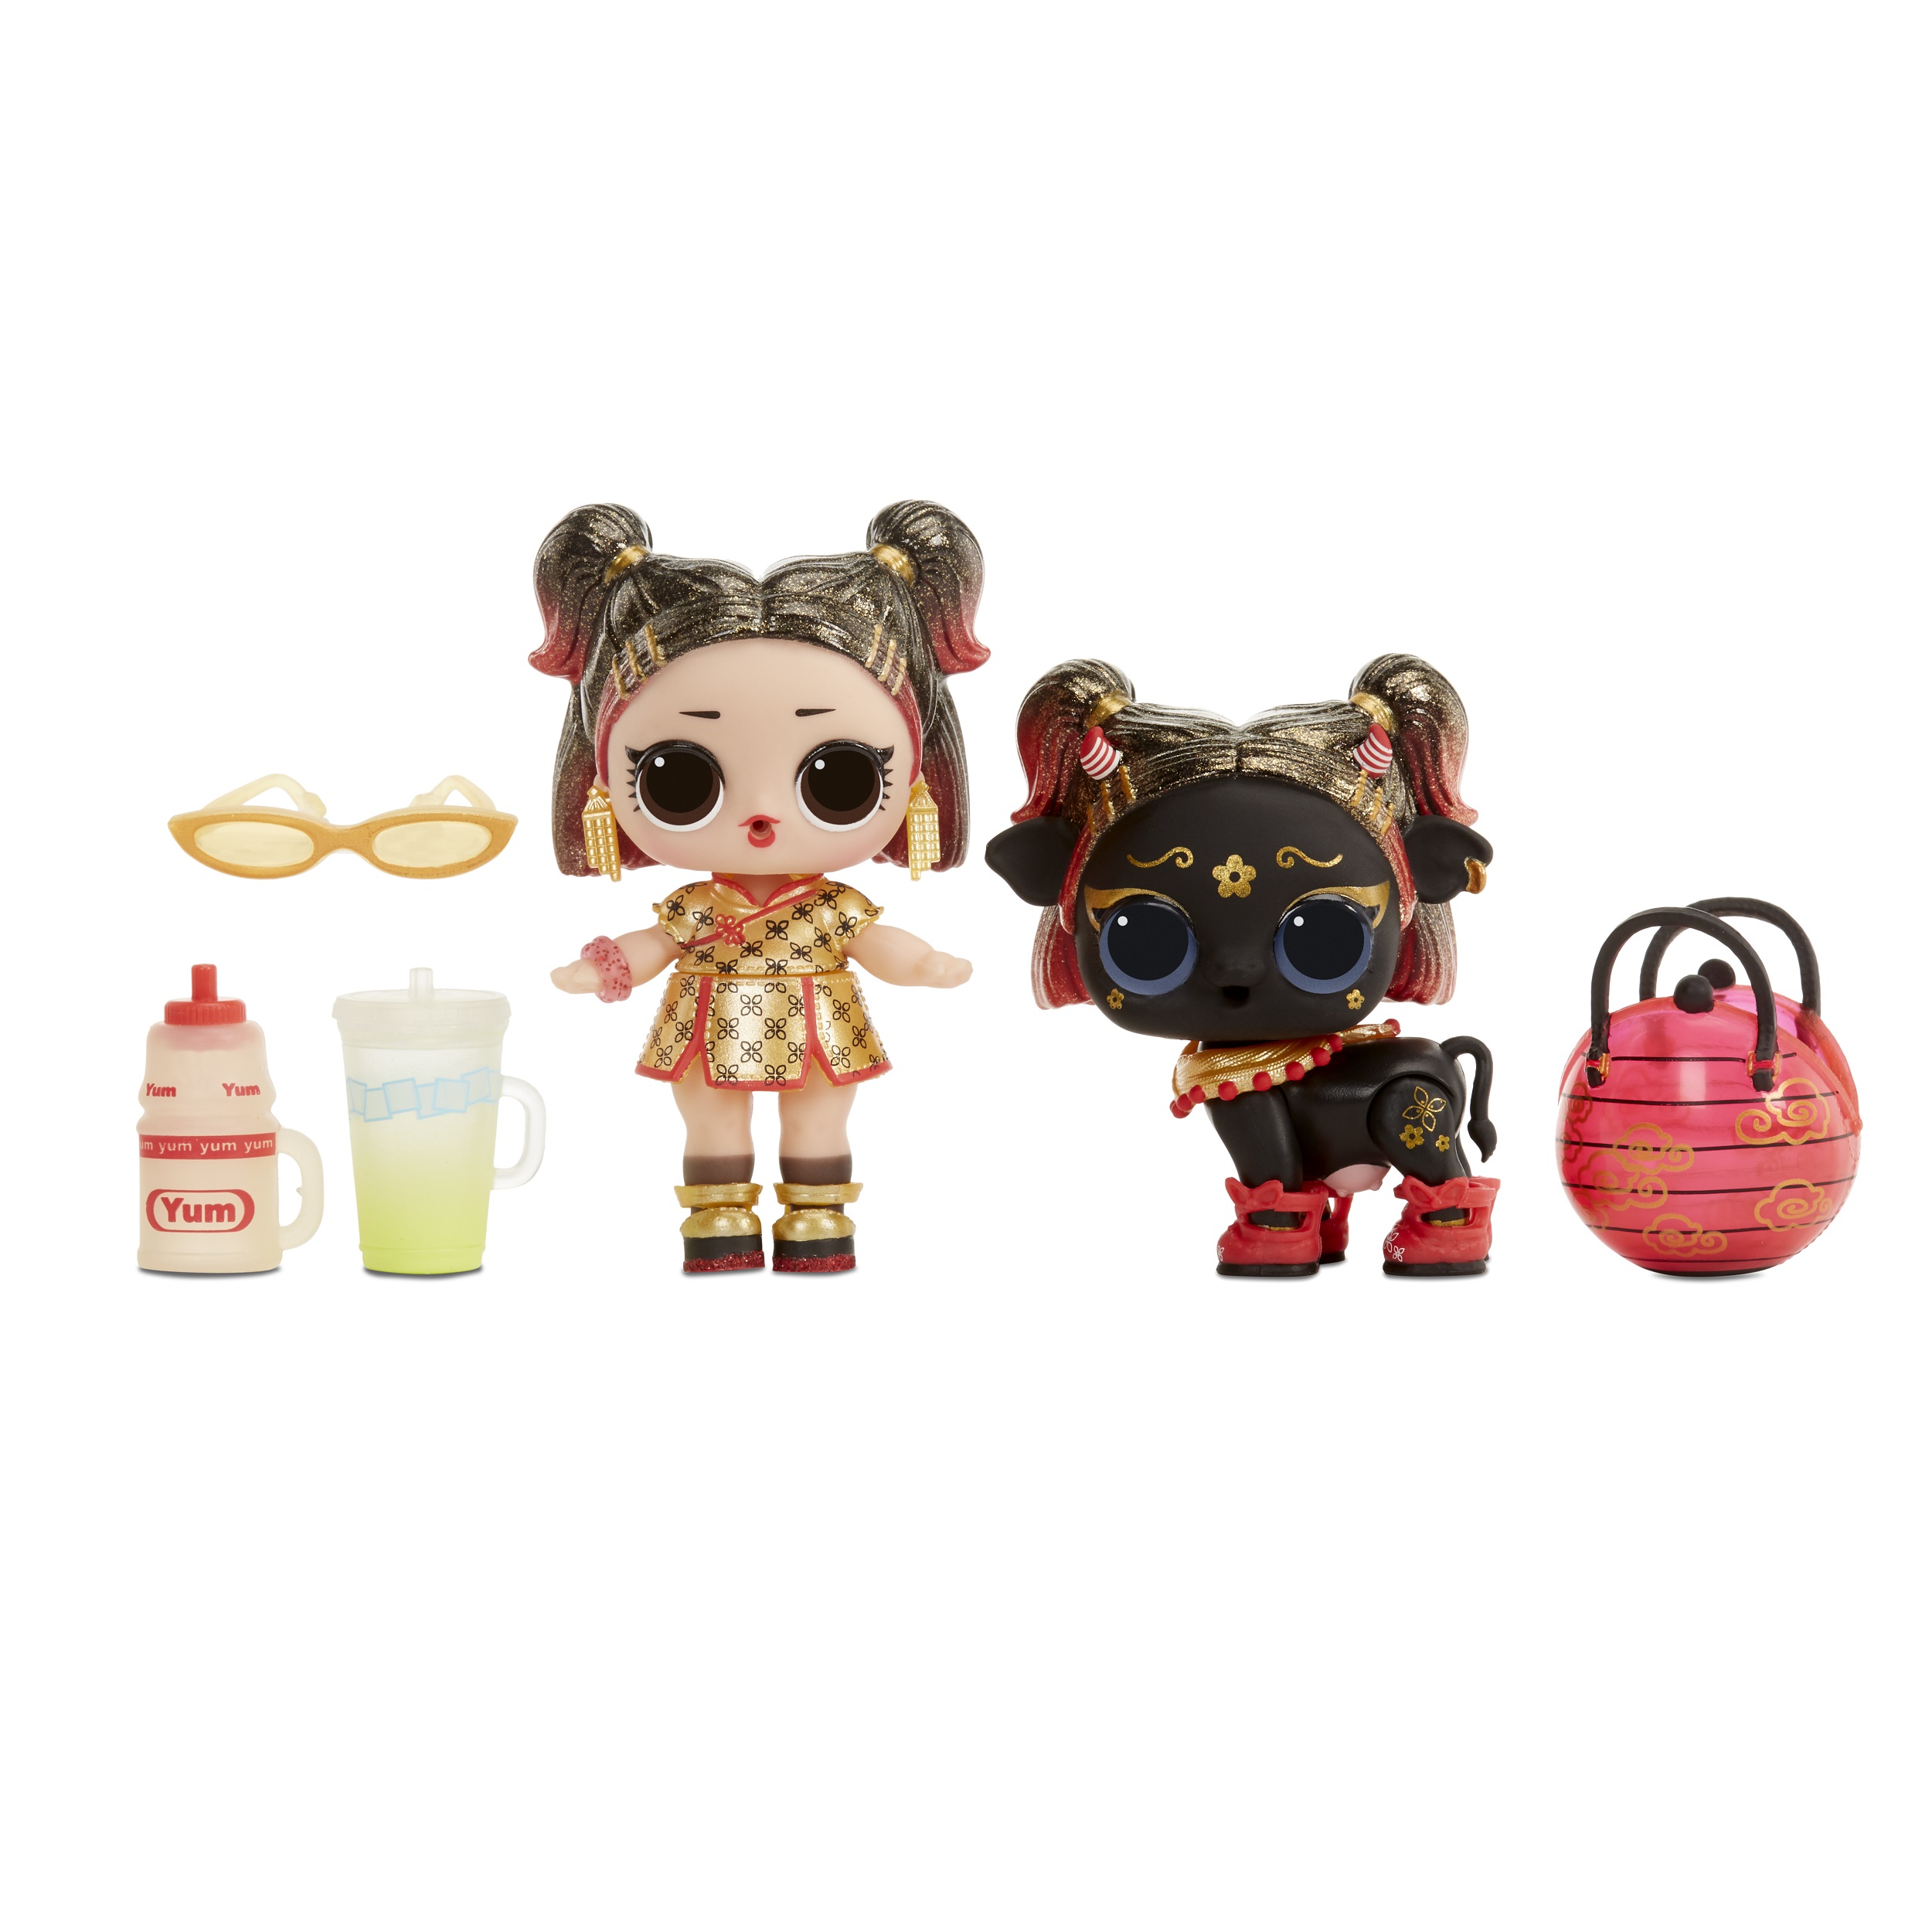 LOL Surprise Year Of The Ox Doll or Pet With 7 Surprises, Lunar New Year Doll or Pet, Accessories. - image 3 of 5